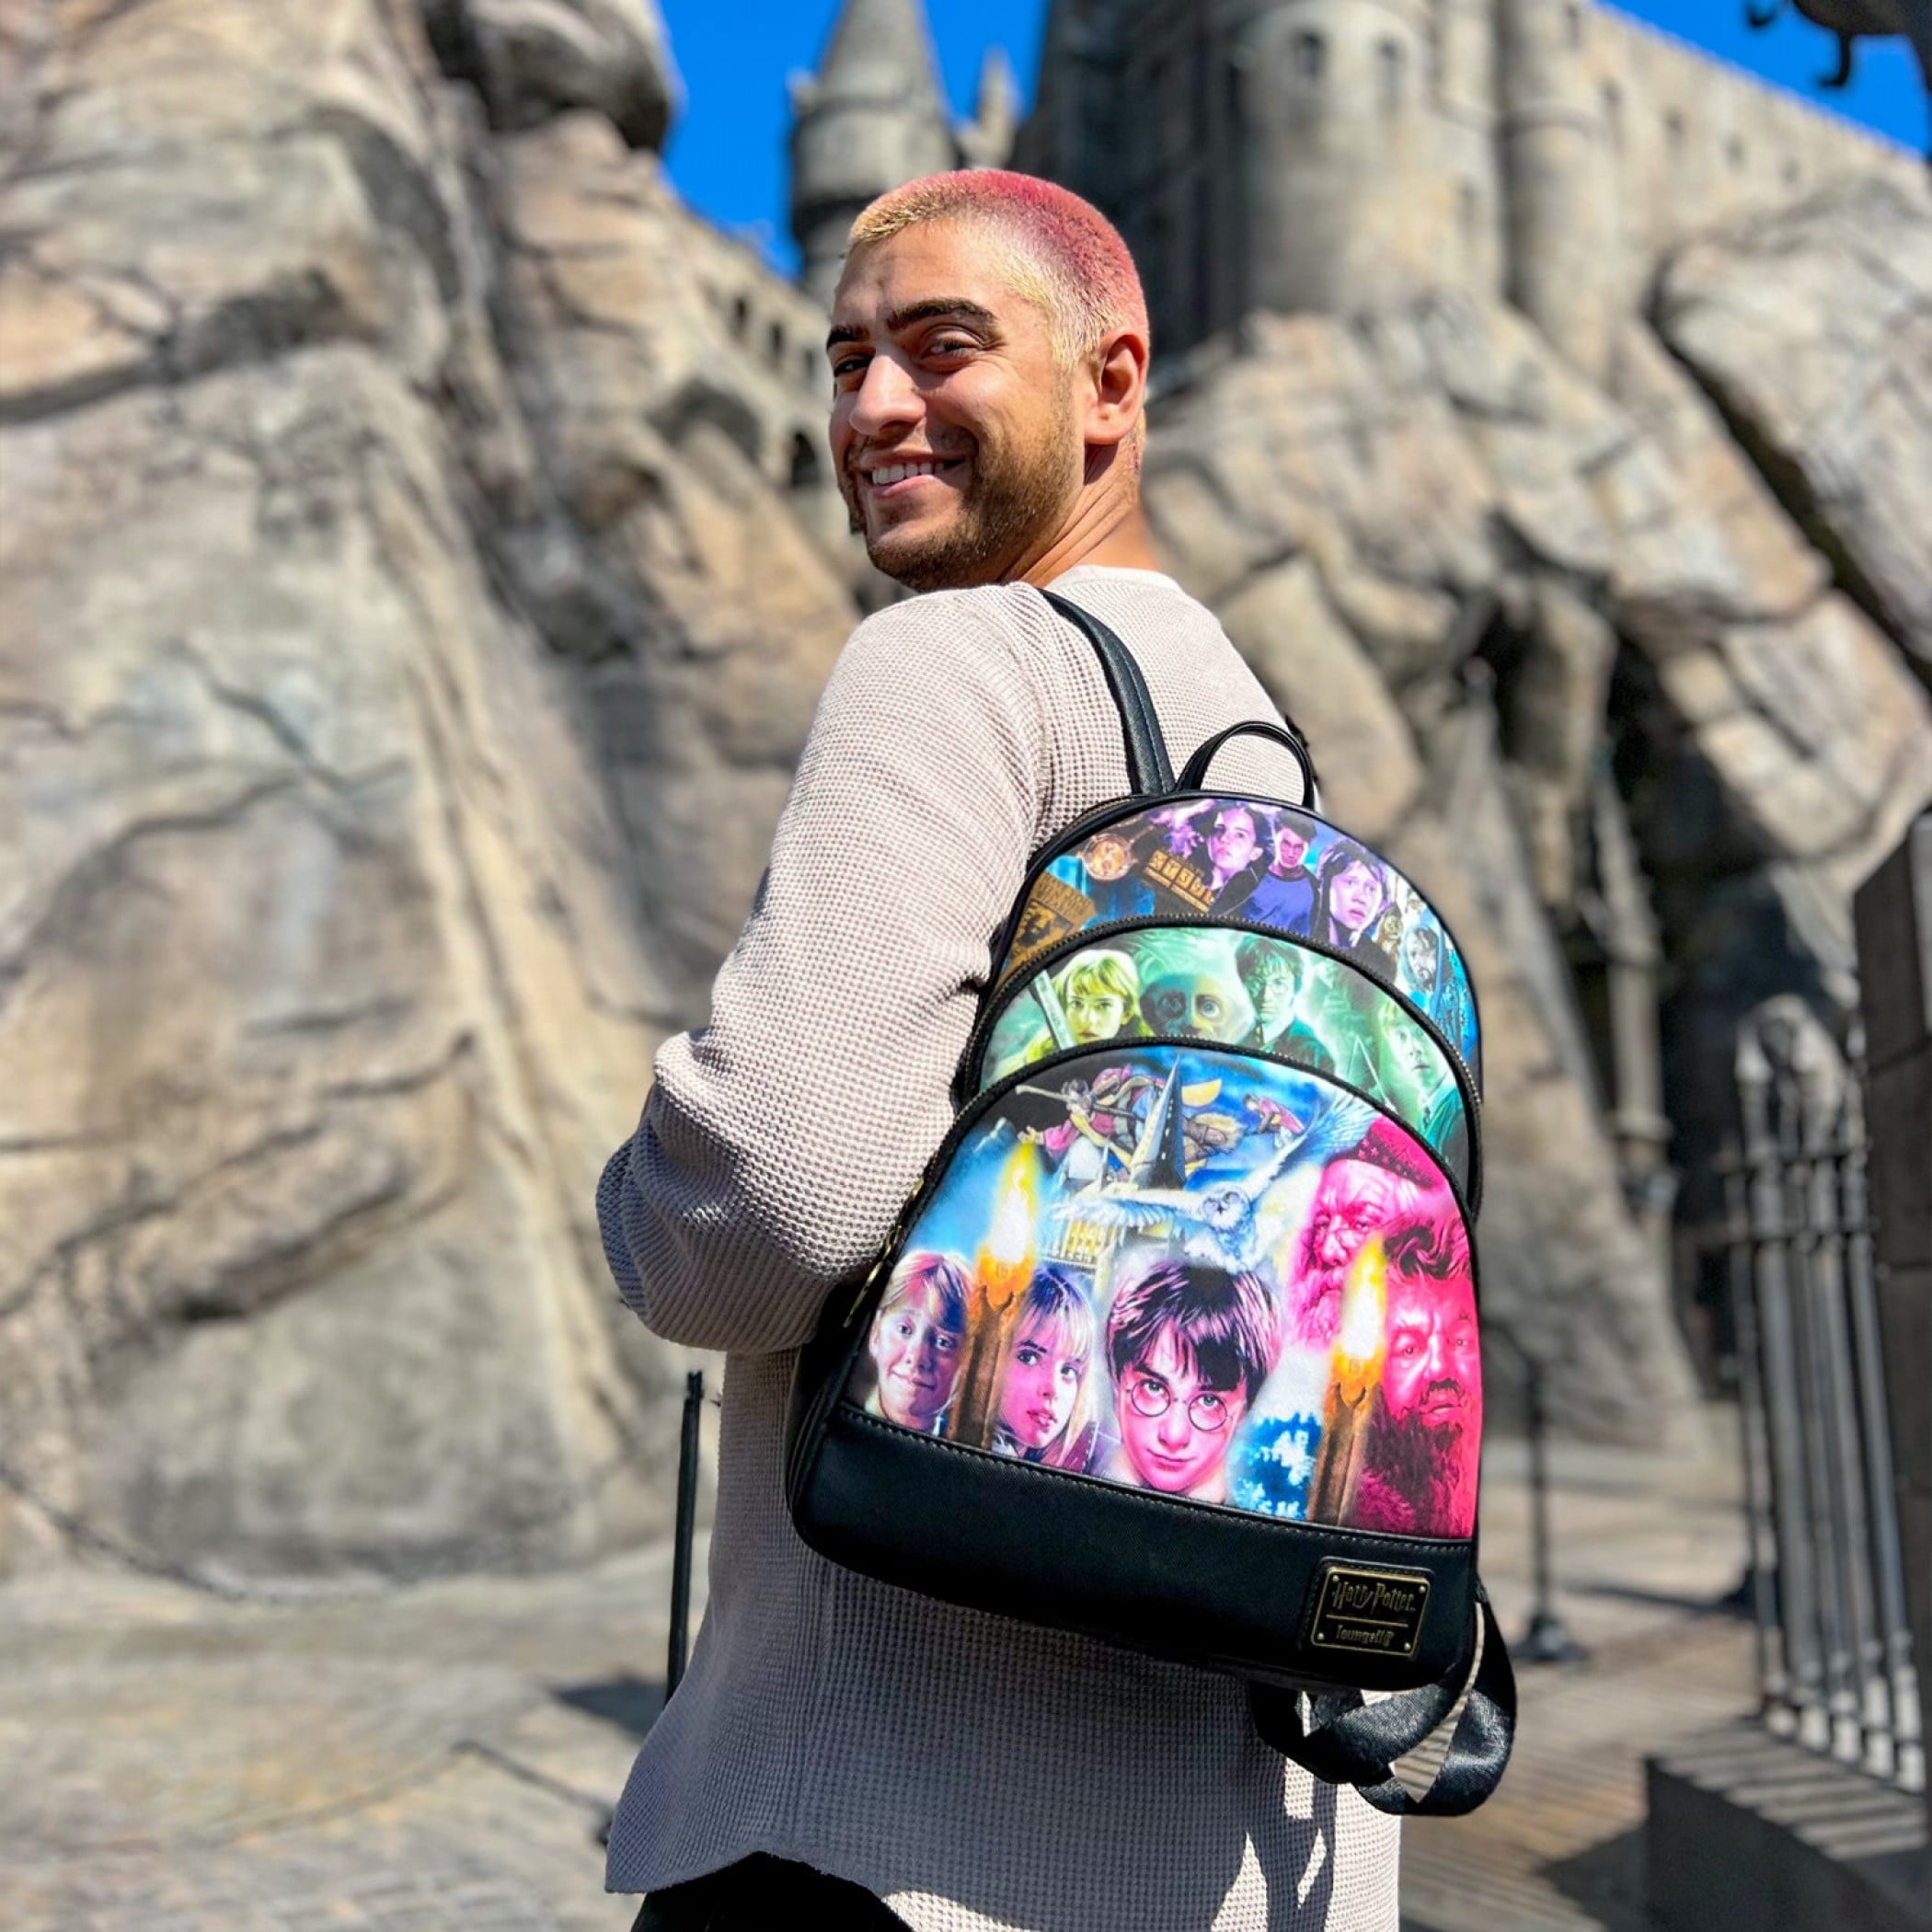 PHOTOS: New 'Harry Potter' Diagon Alley Loungefly Purse at Universal  Orlando Resort - WDW News Today